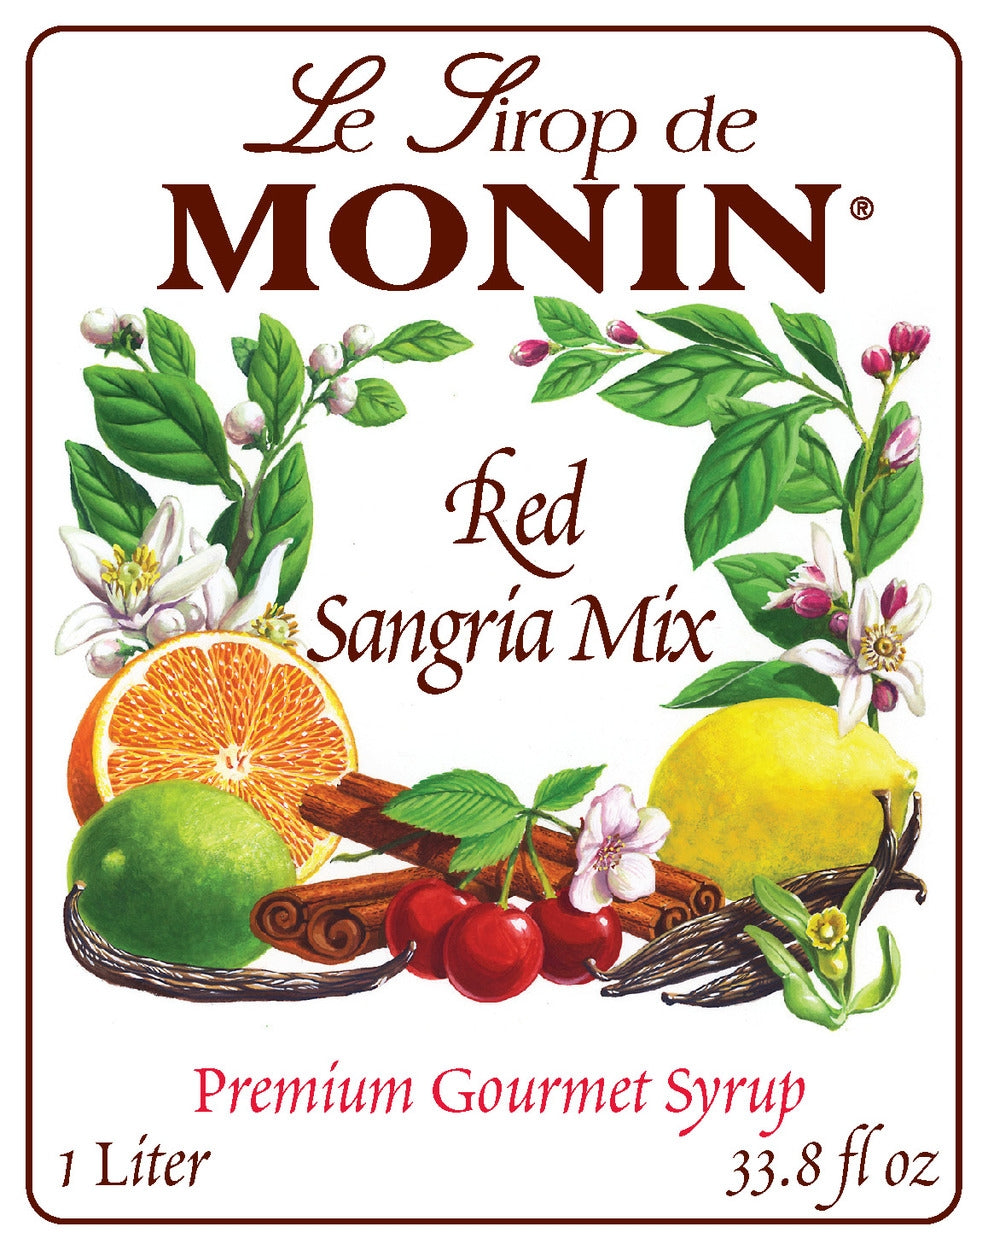 case of Red Sangria Mix - Monin - Premium Syrups and Flavourings - 4 x 1 L per case